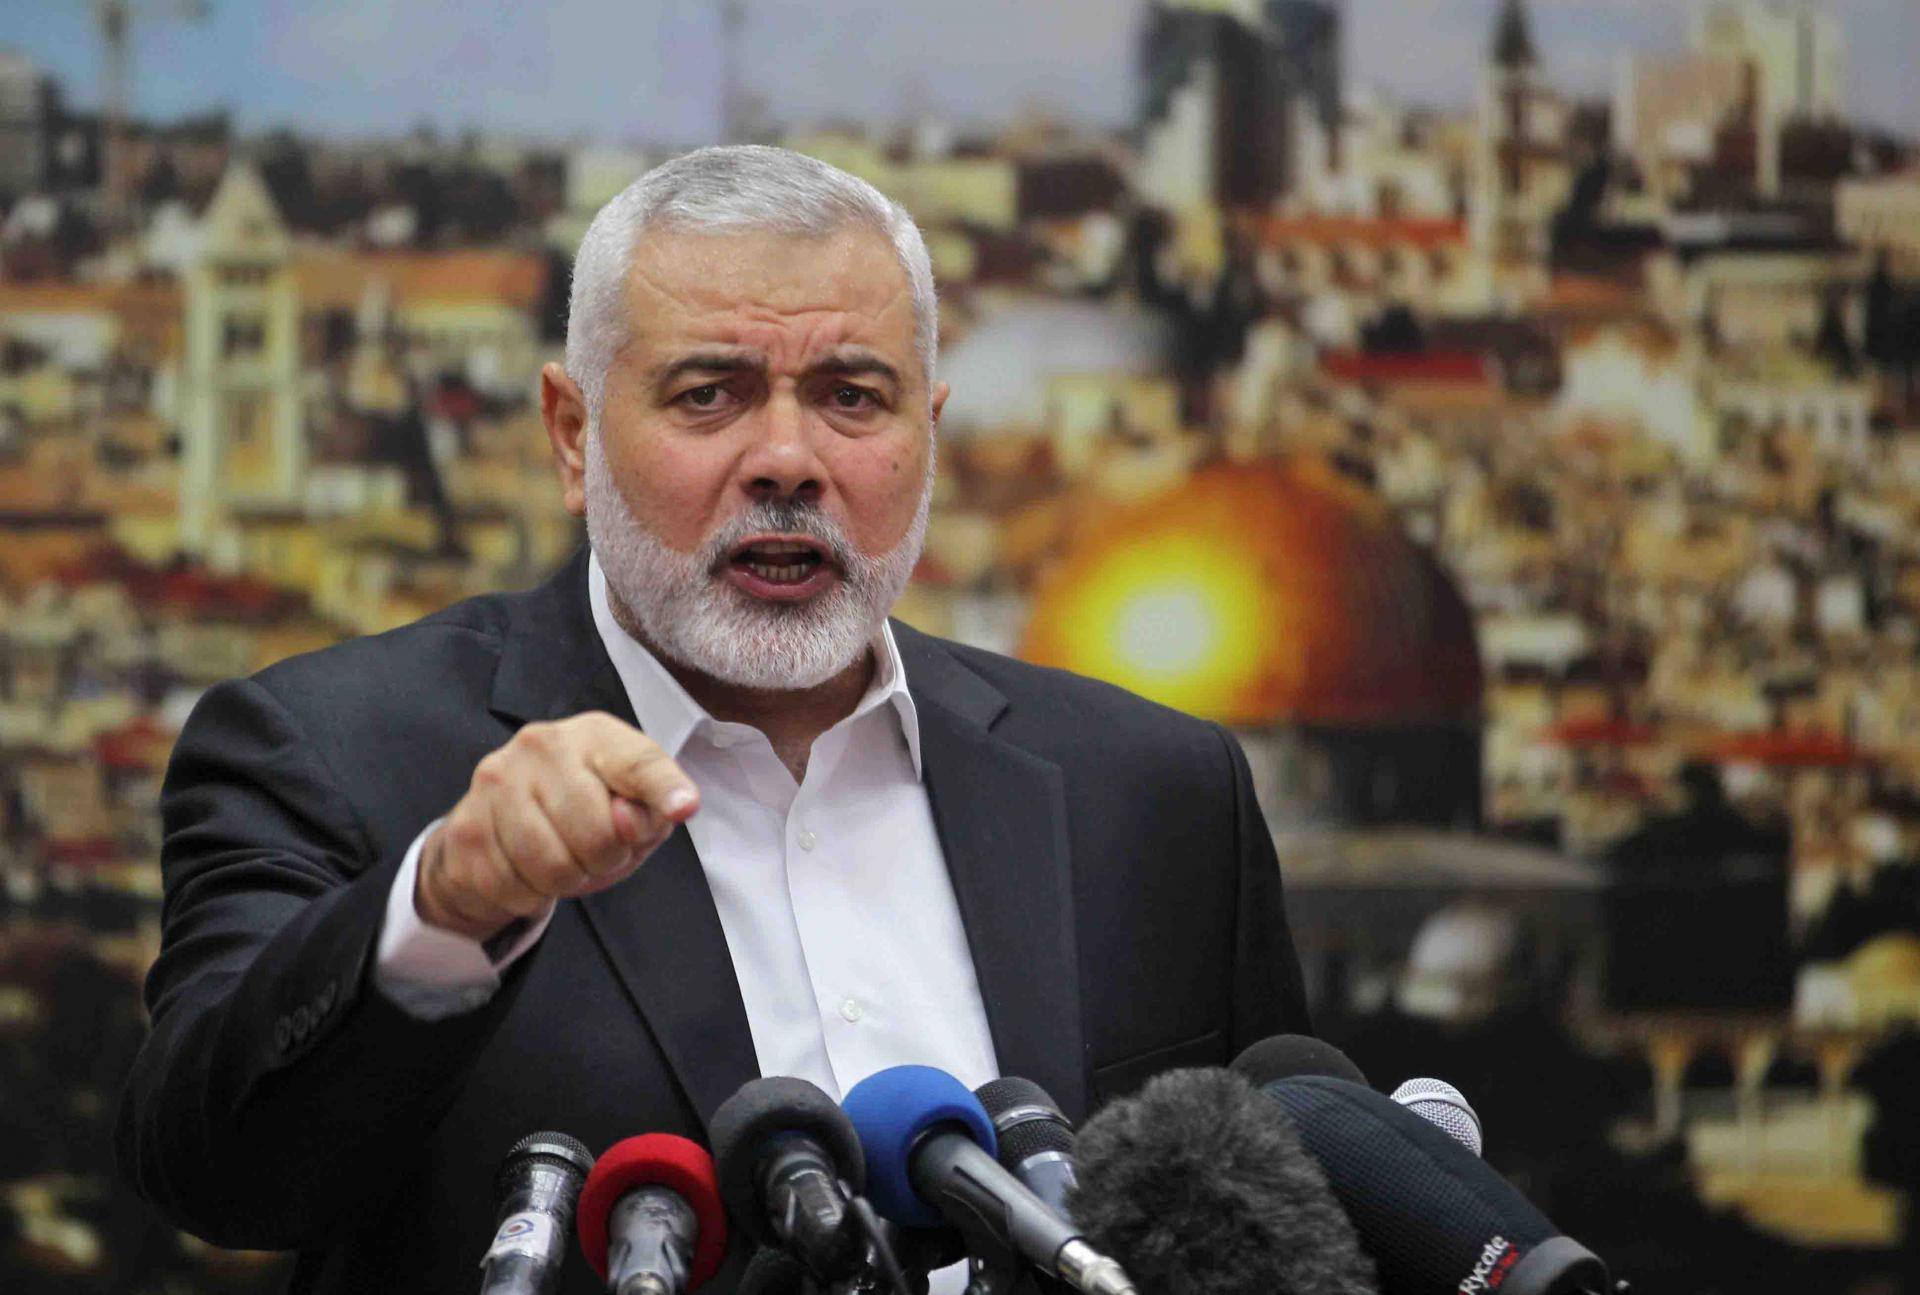 He added that Hamas did not care who won the Israeli elections